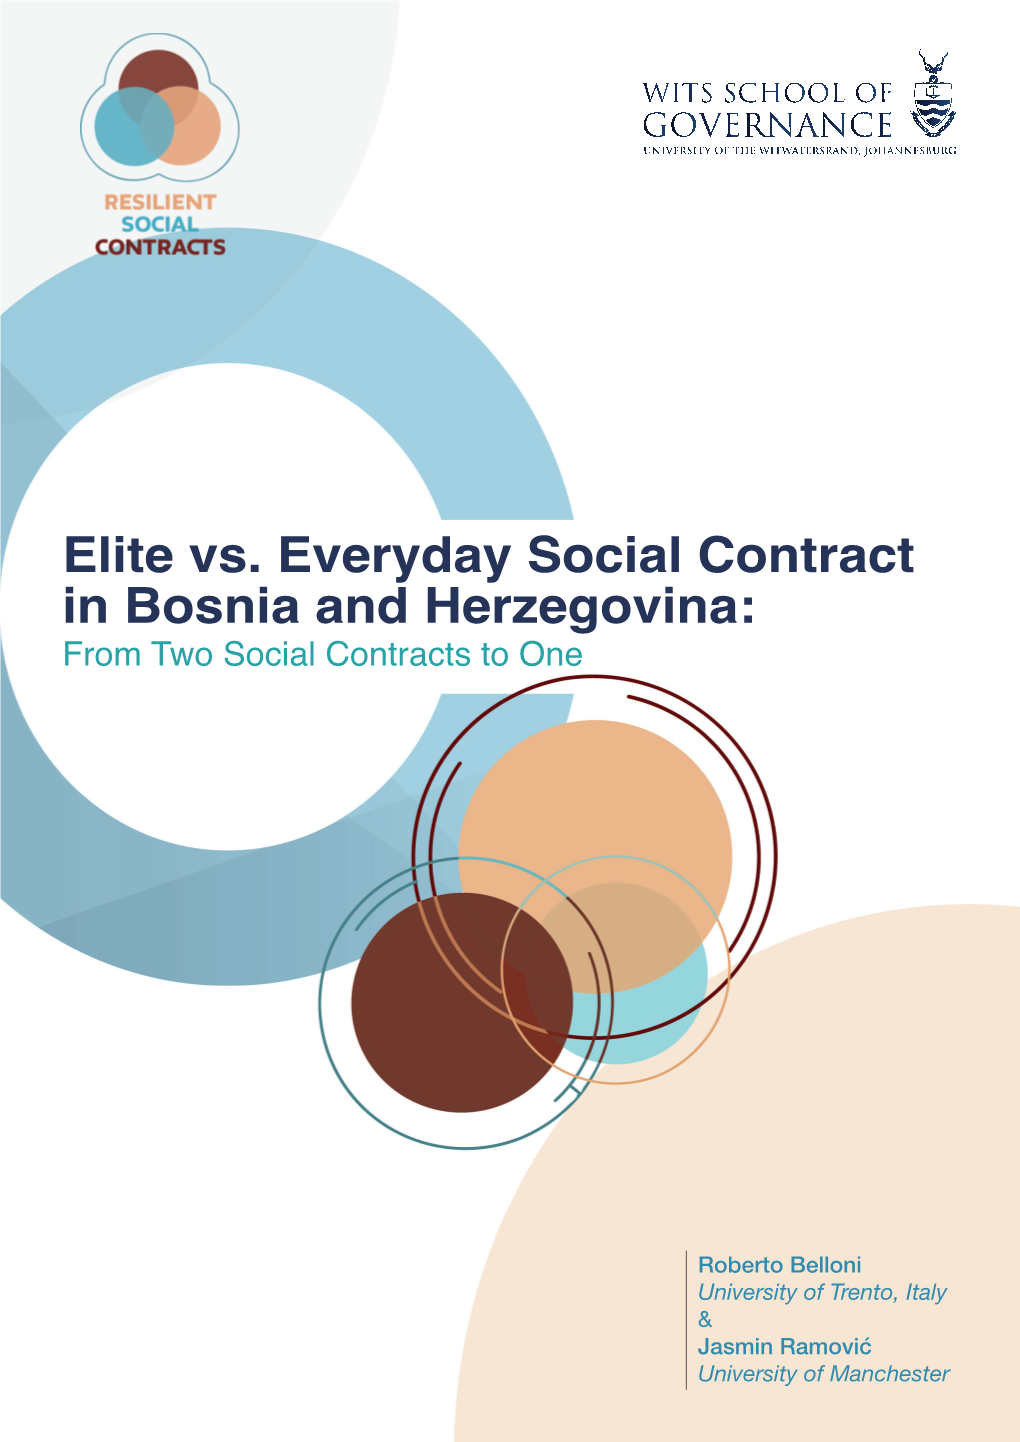 Resilient Social Contracts Bih Case Study